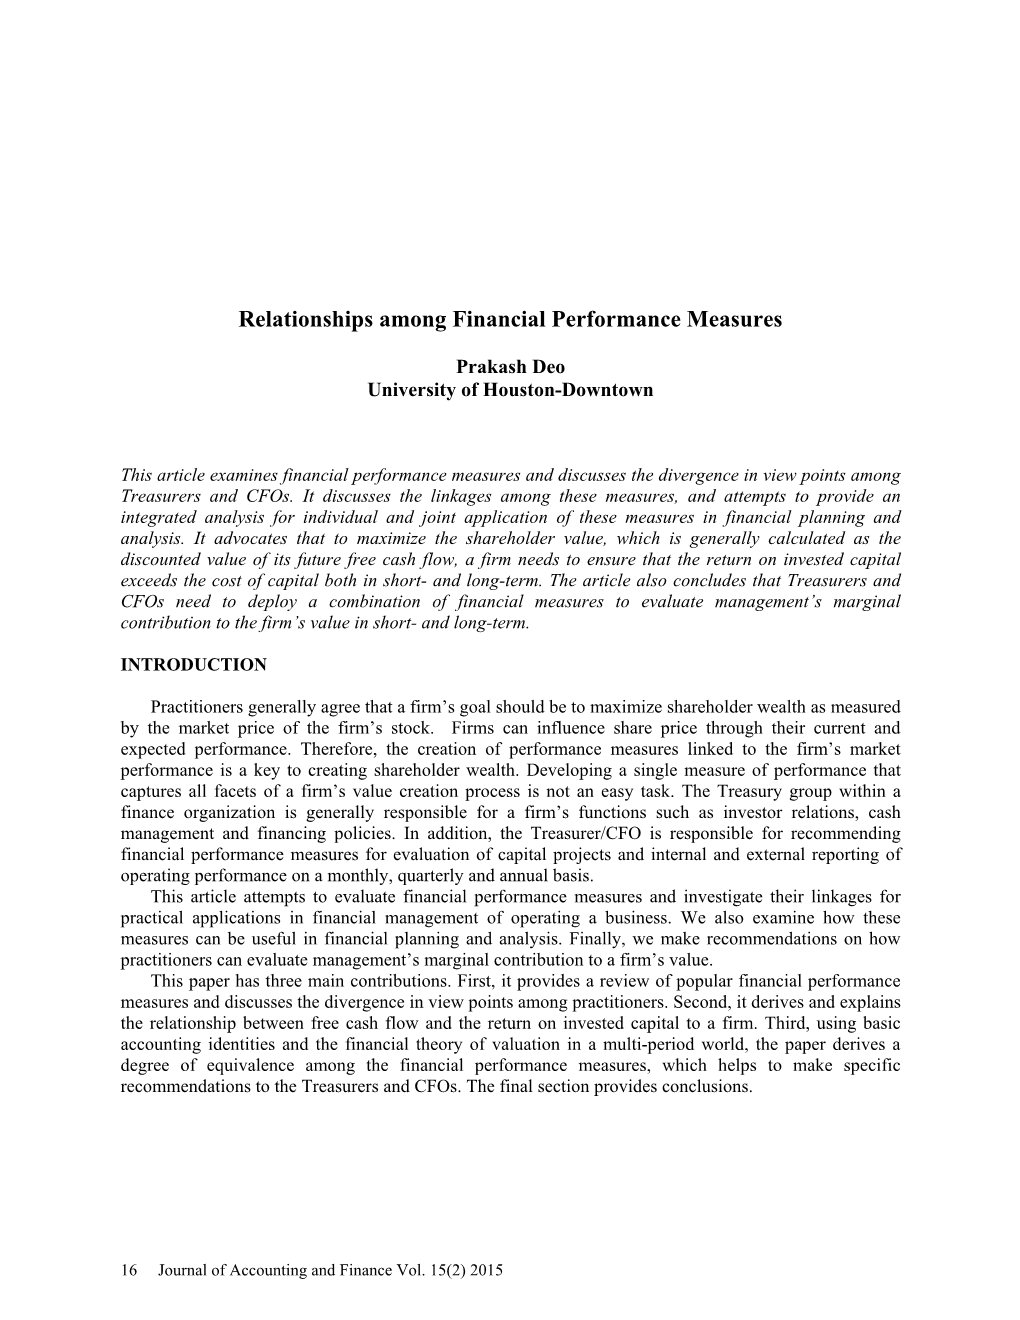 Relationships Among Financial Performance Measures